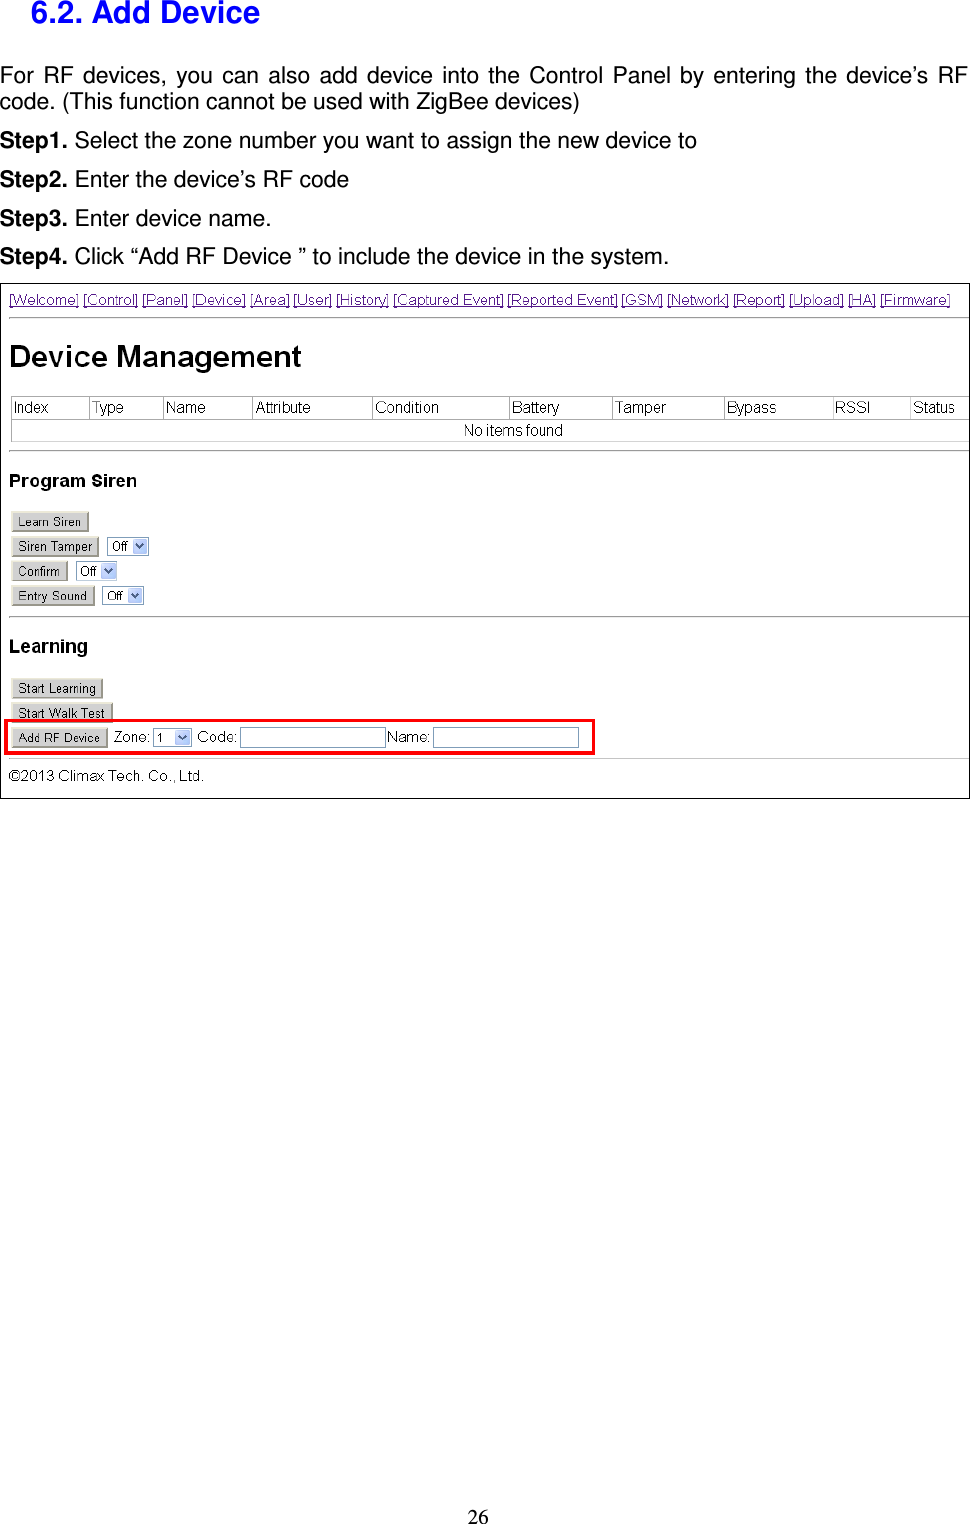  26 6.2. Add Device For  RF  devices, you can  also  add device into the  Control Panel by entering the  device’s  RF code. (This function cannot be used with ZigBee devices) Step1. Select the zone number you want to assign the new device to Step2. Enter the device’s RF code Step3. Enter device name. Step4. Click “Add RF Device ” to include the device in the system.                 